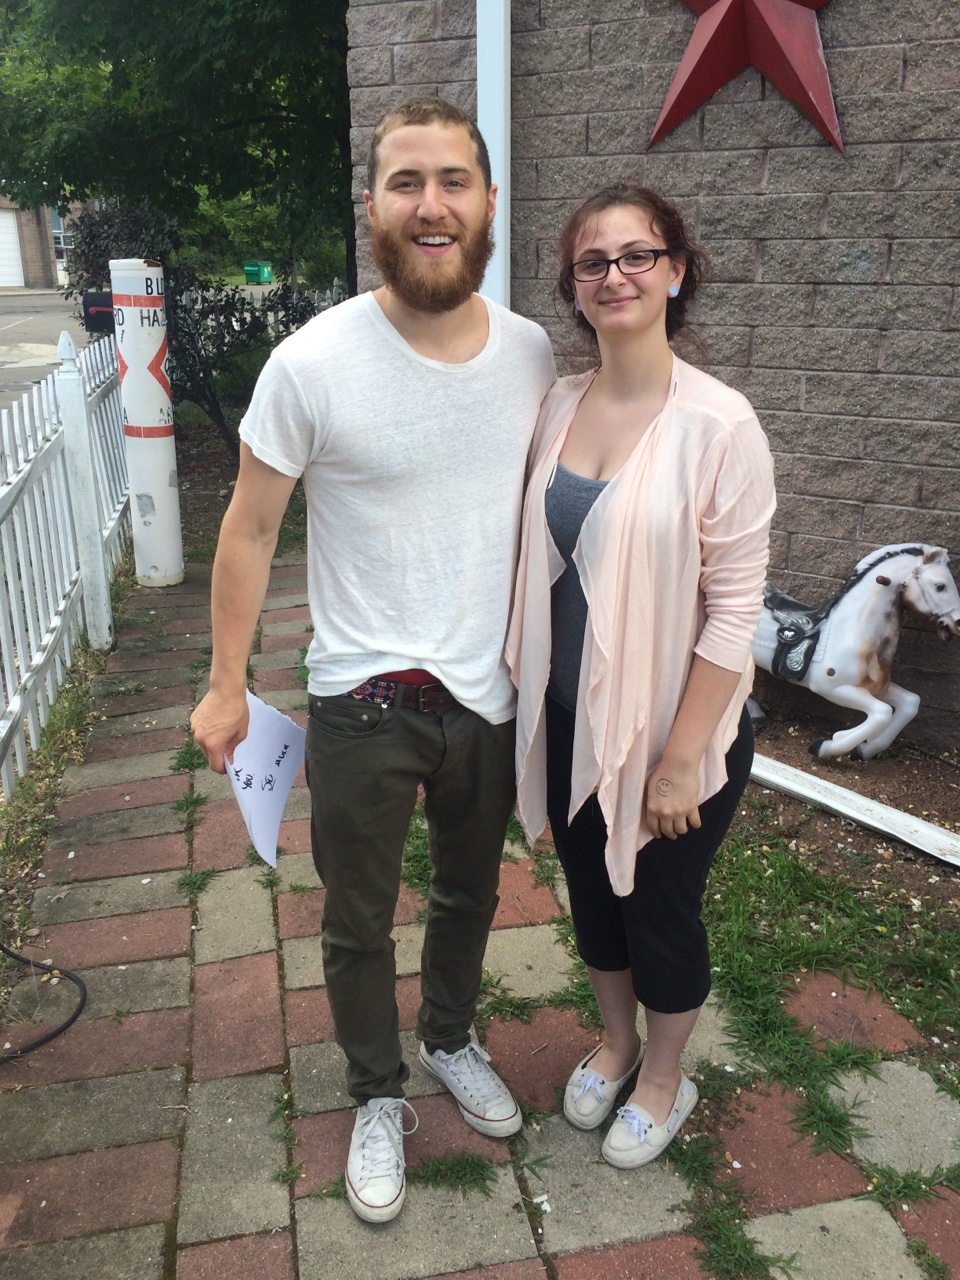 Mike Posner at The Space in Hamden, NJ August 1, 2015
twitter.com/AuggieLicausi
